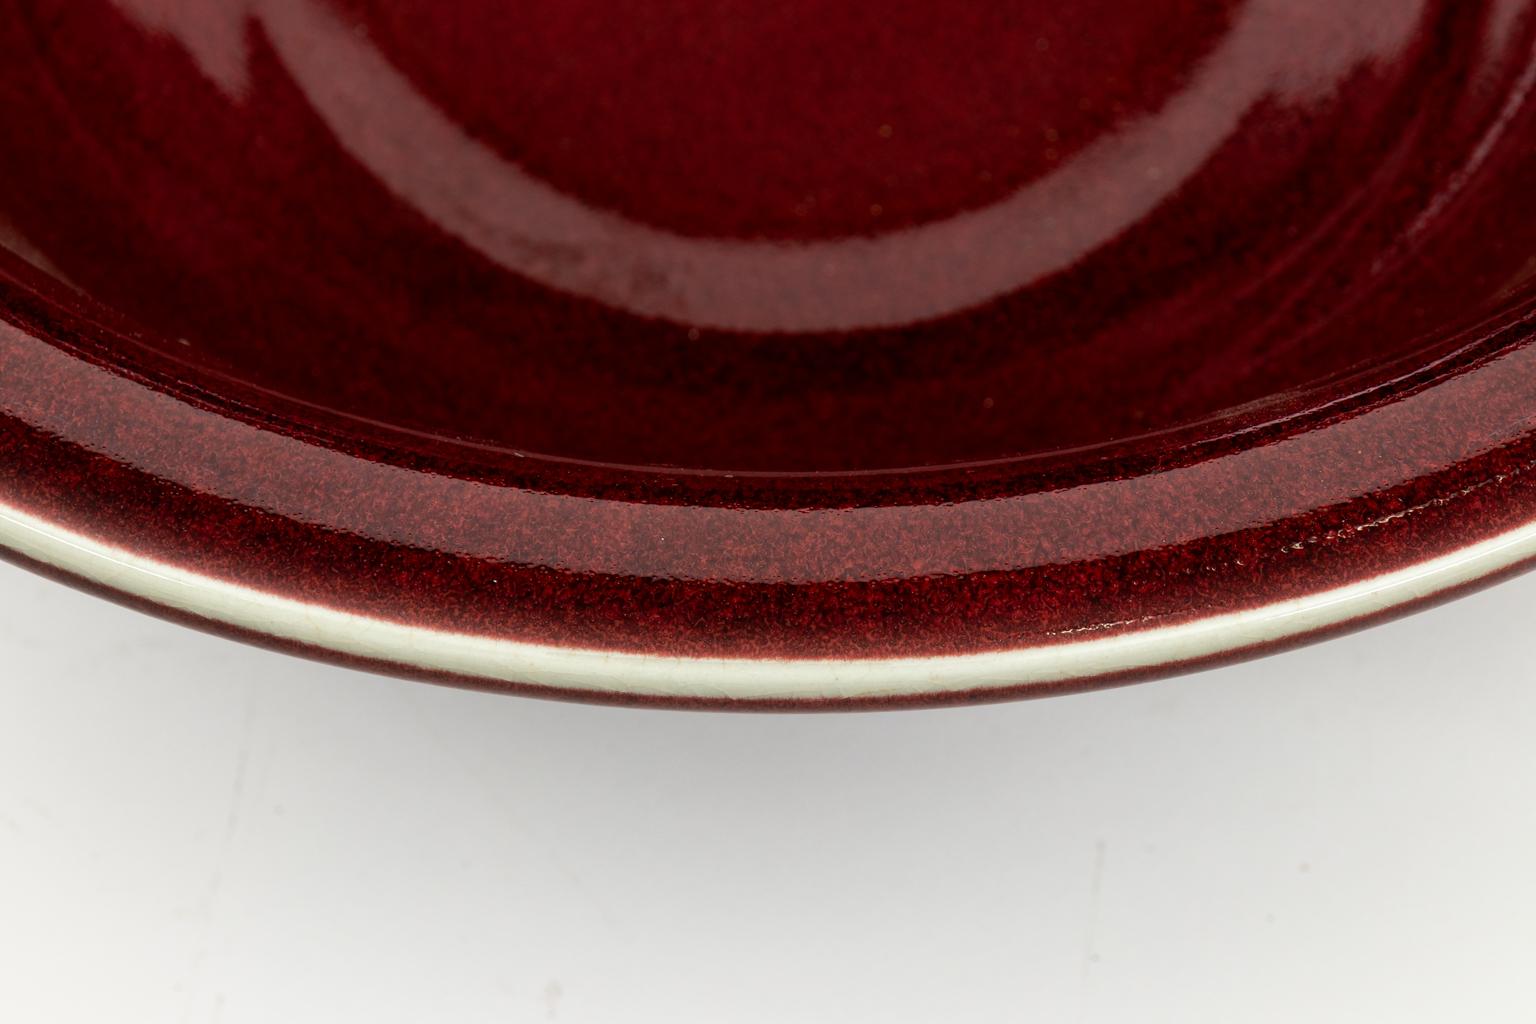 Ceramic Oxblood bowl in a glazed finish. Please note of wear consistent with age including minor finish loss.